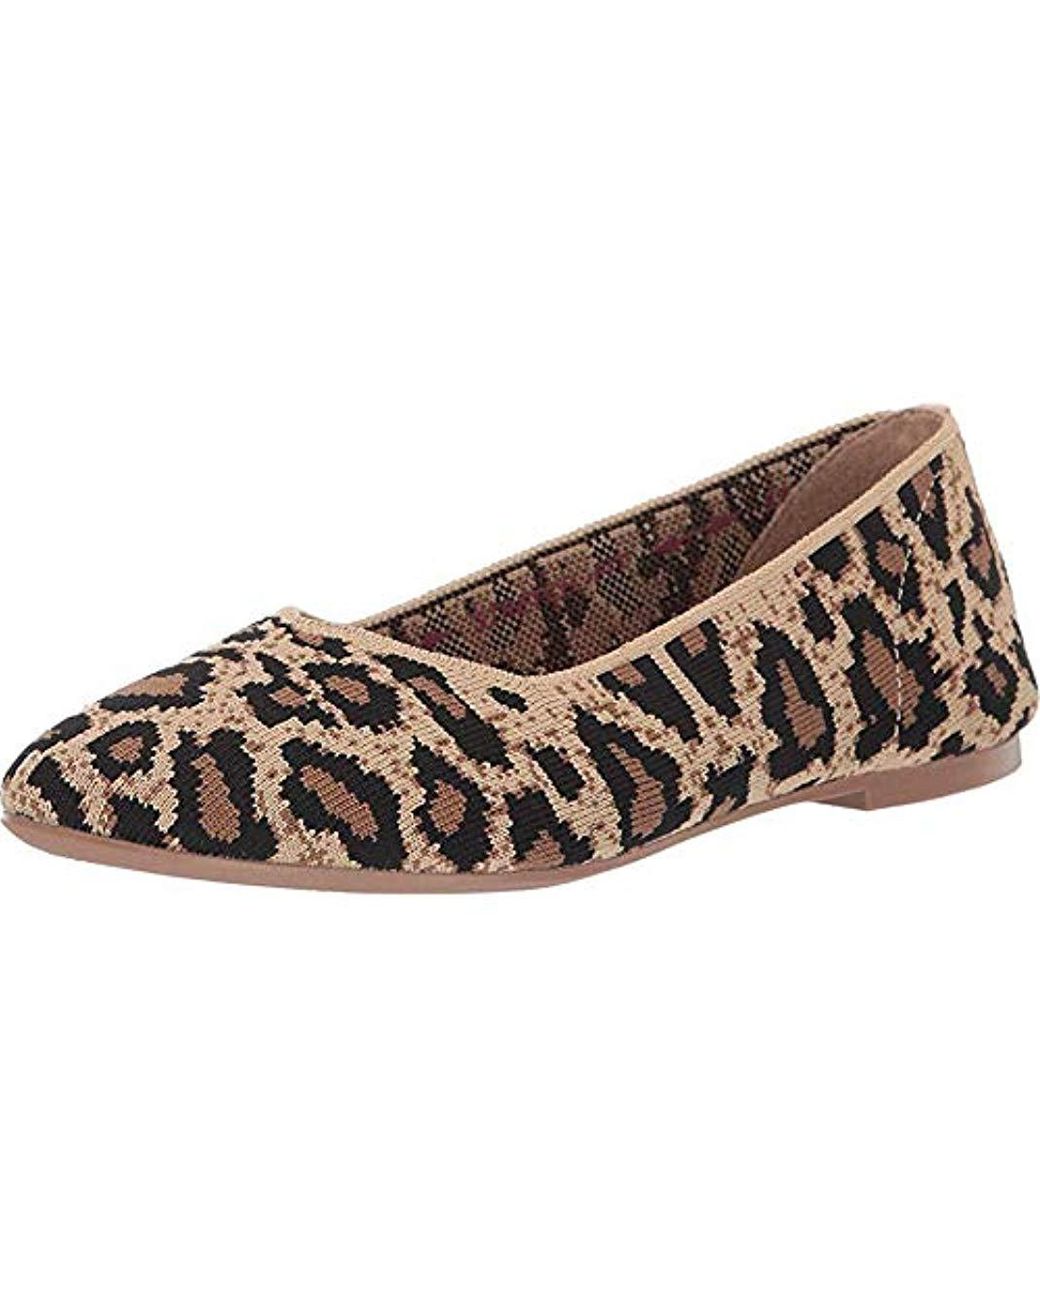 Skechers Cleo-claw-some-leopard Print Engineered Knit Skimmer Ballet Flat  in Natural | Lyst